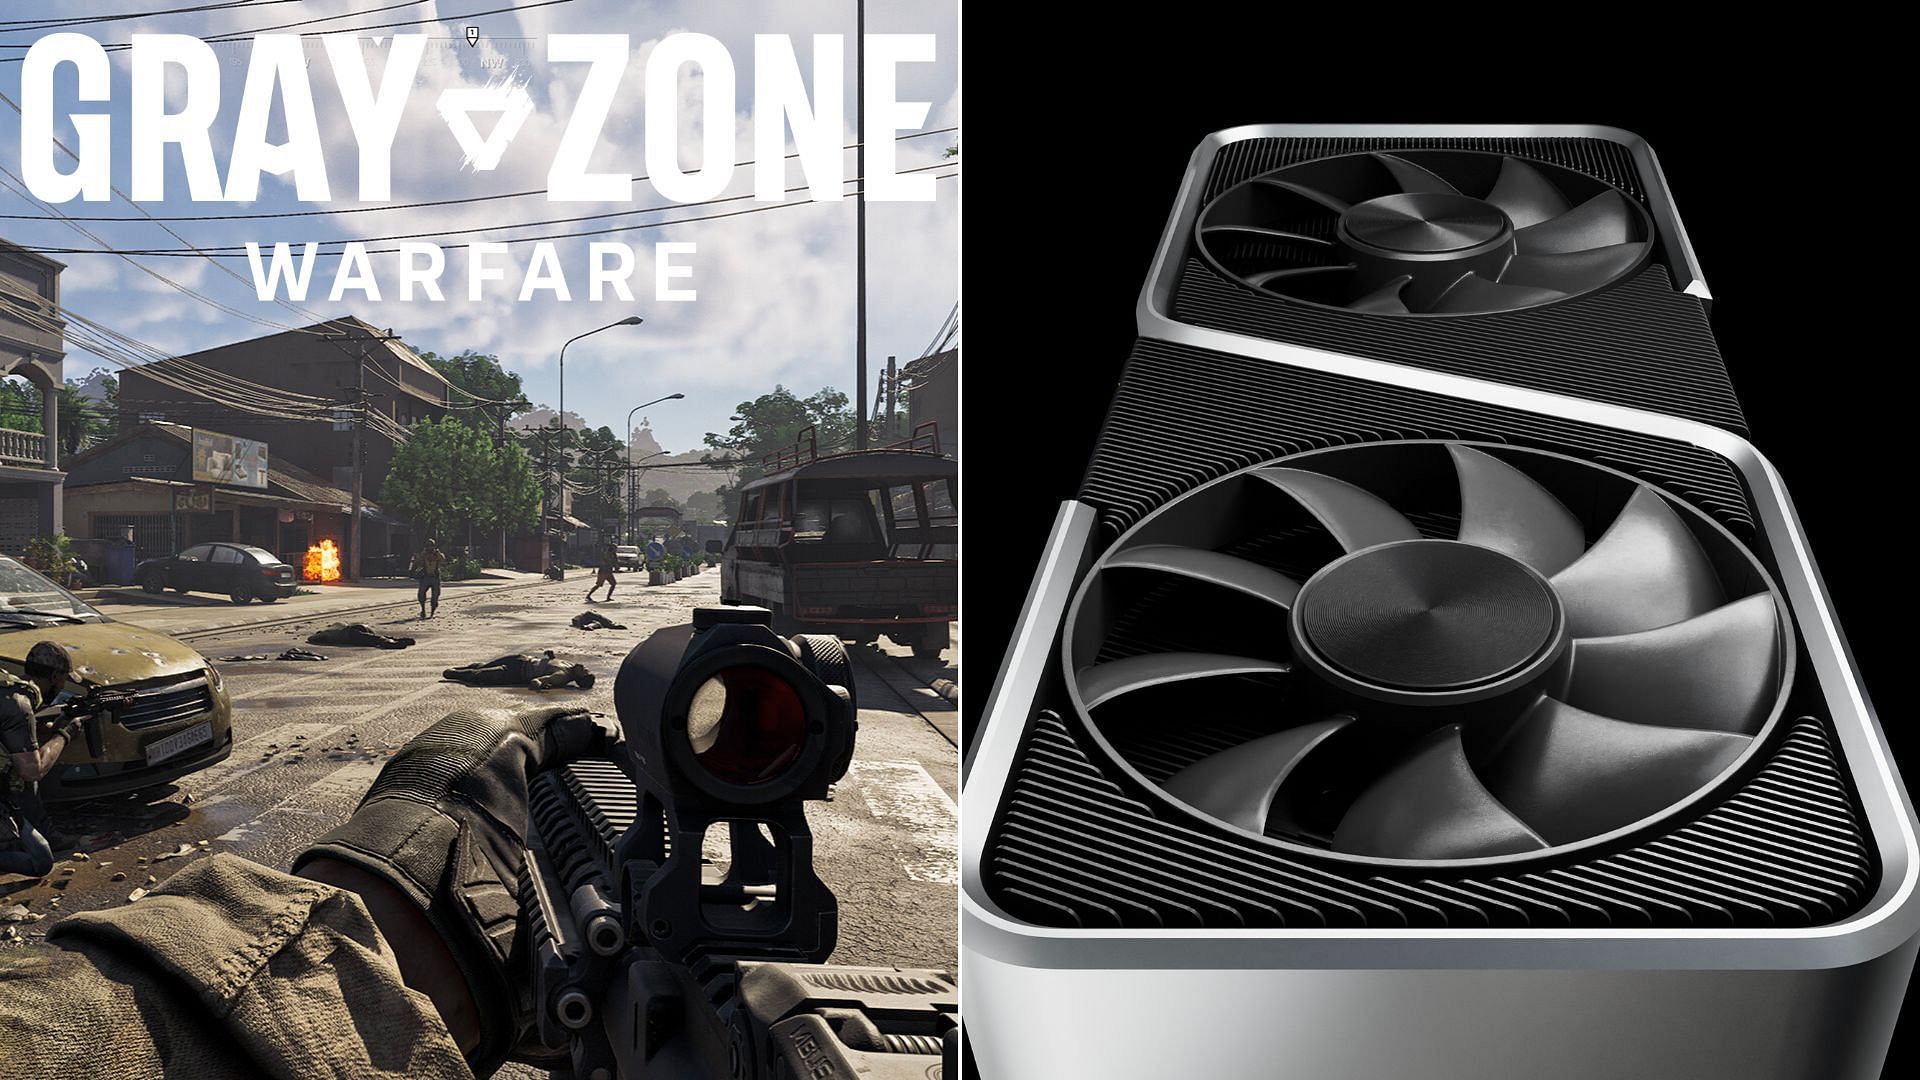 The RTX 3060 and 3060 Ti can play Gray Zone Warfare pretty well (Image via Nvidia and Steam)